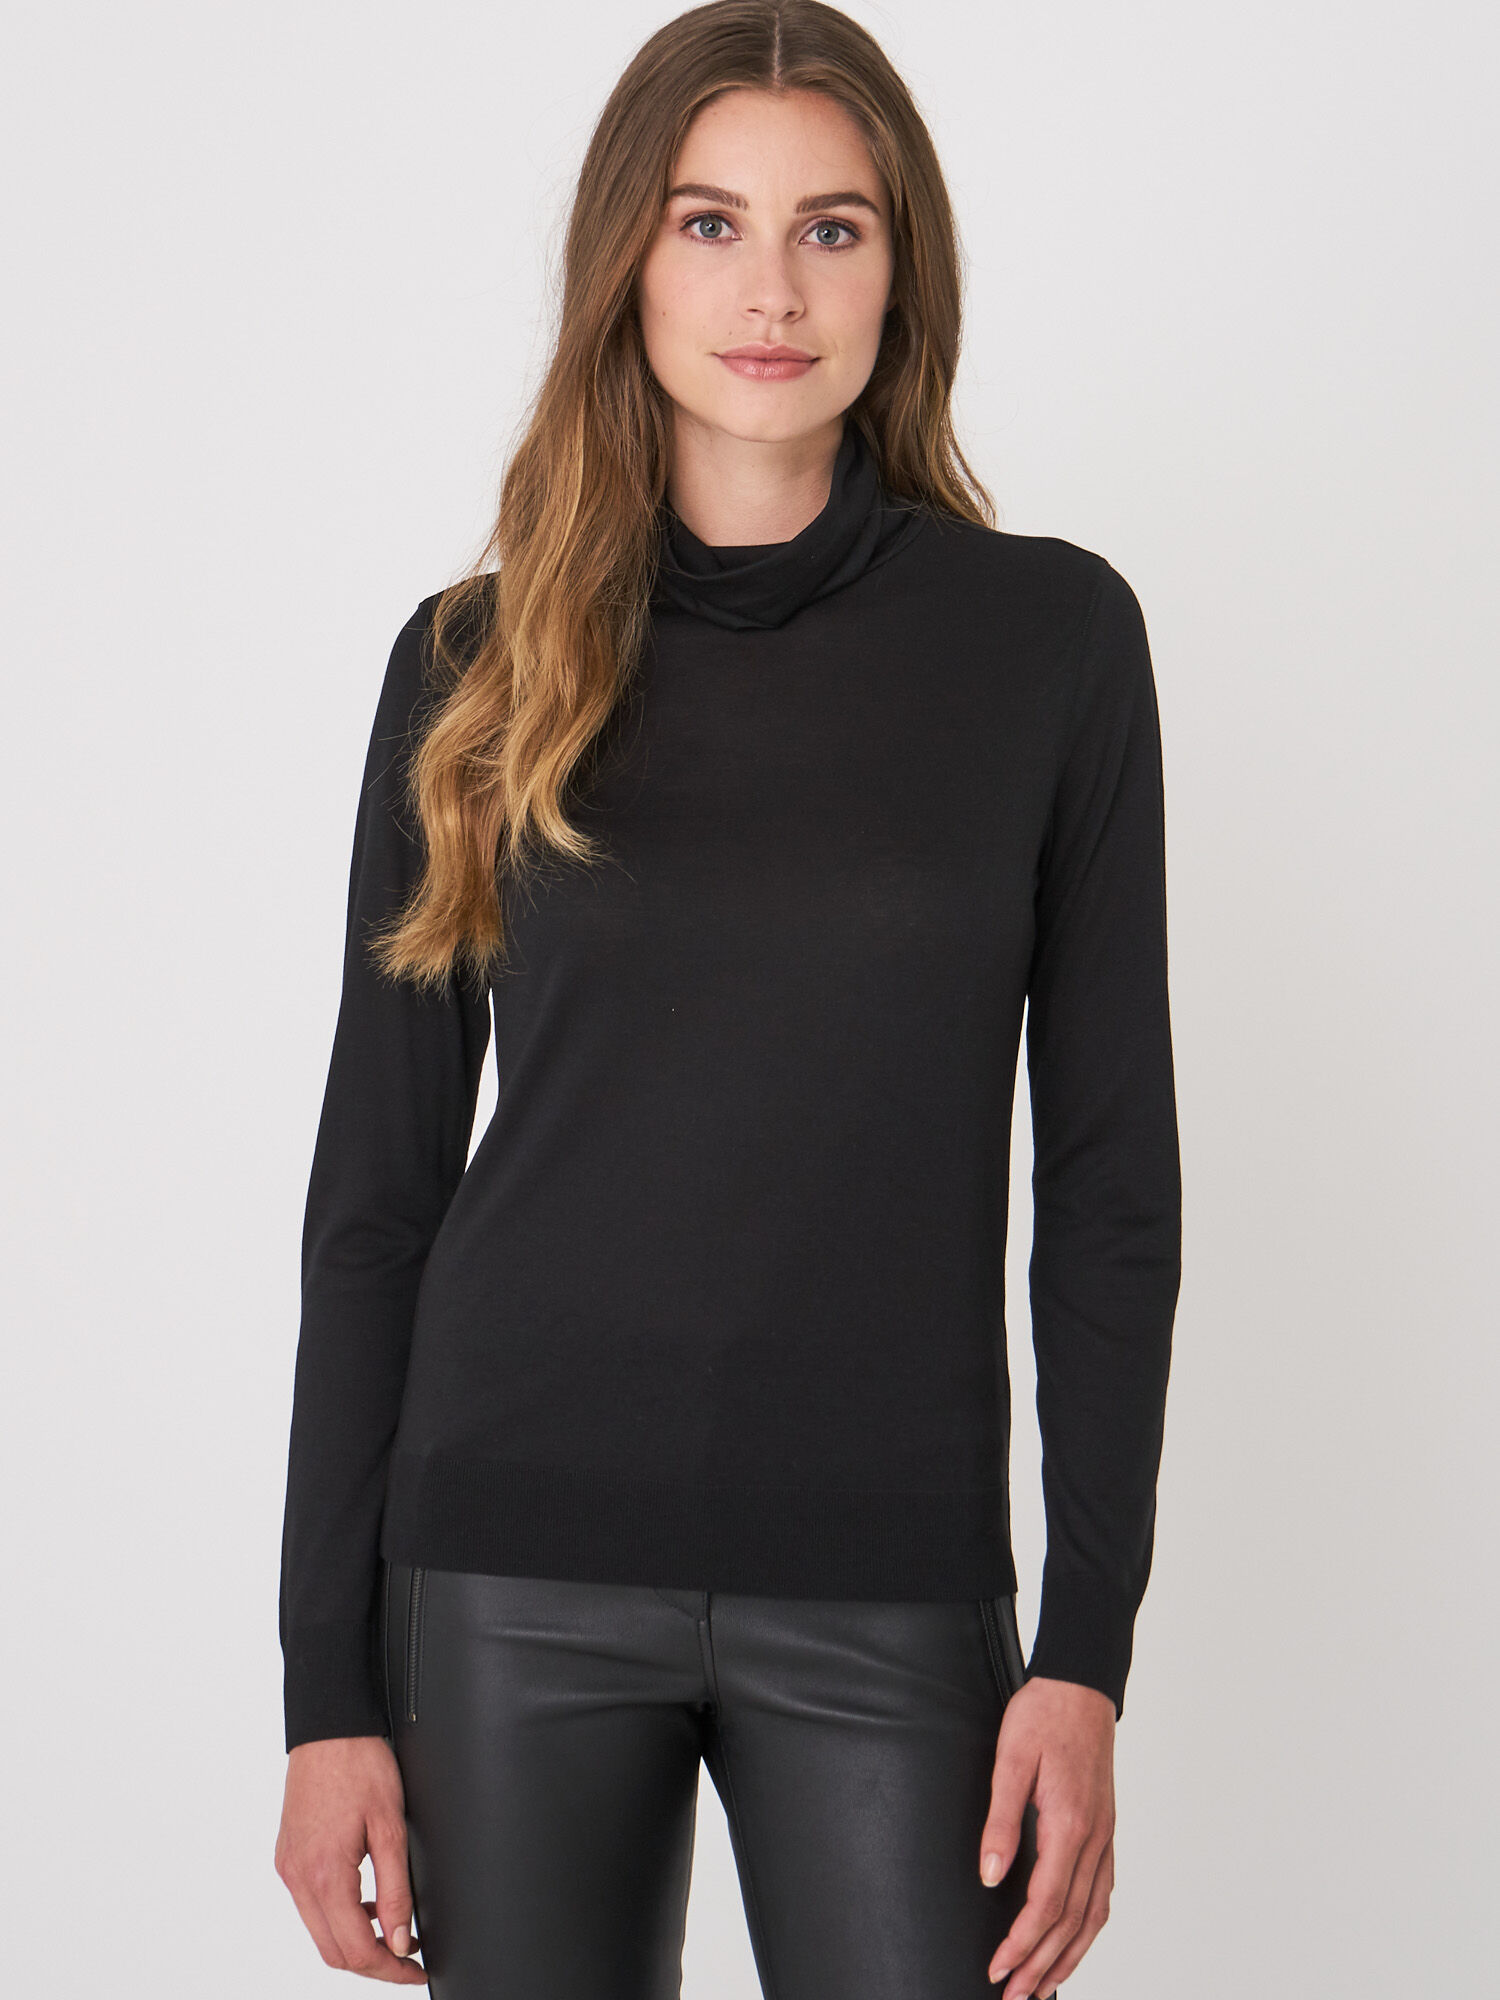 Long-sleeved turtleneck in high quality lyocell-cotton blend